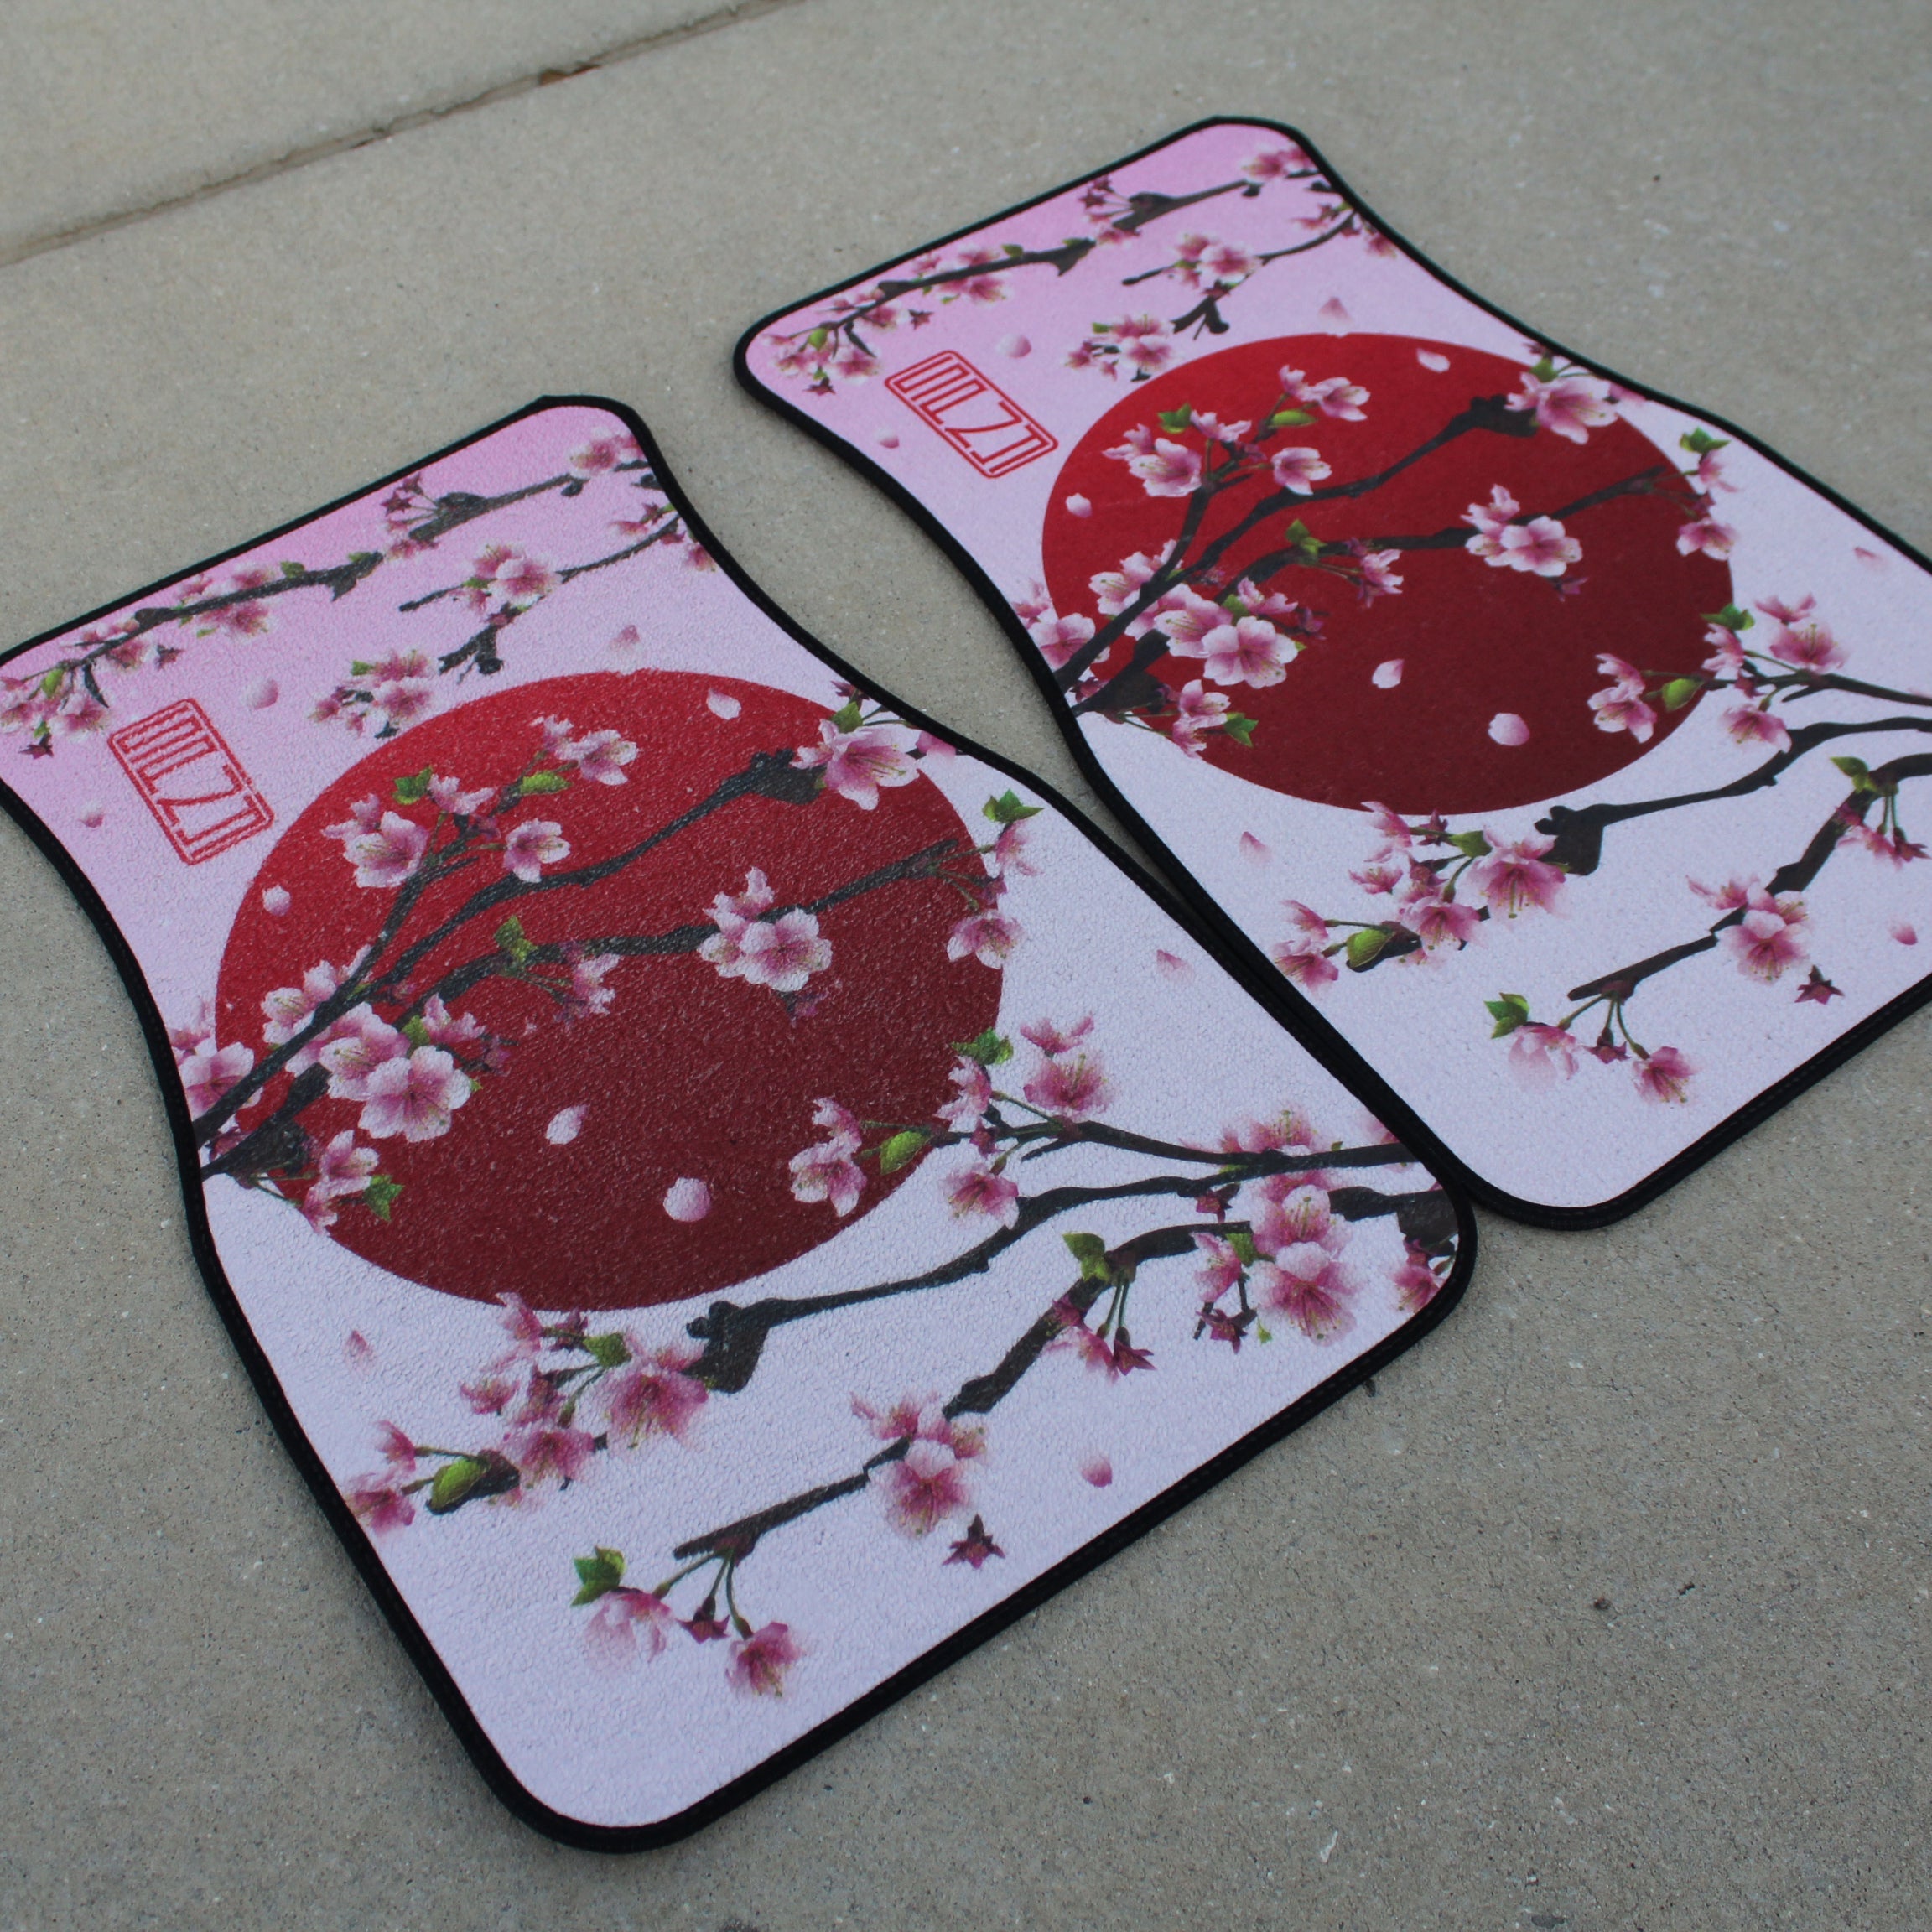 Pastel Donut Pattern Print Front And Back Car Floor Mats, Front Car Ma